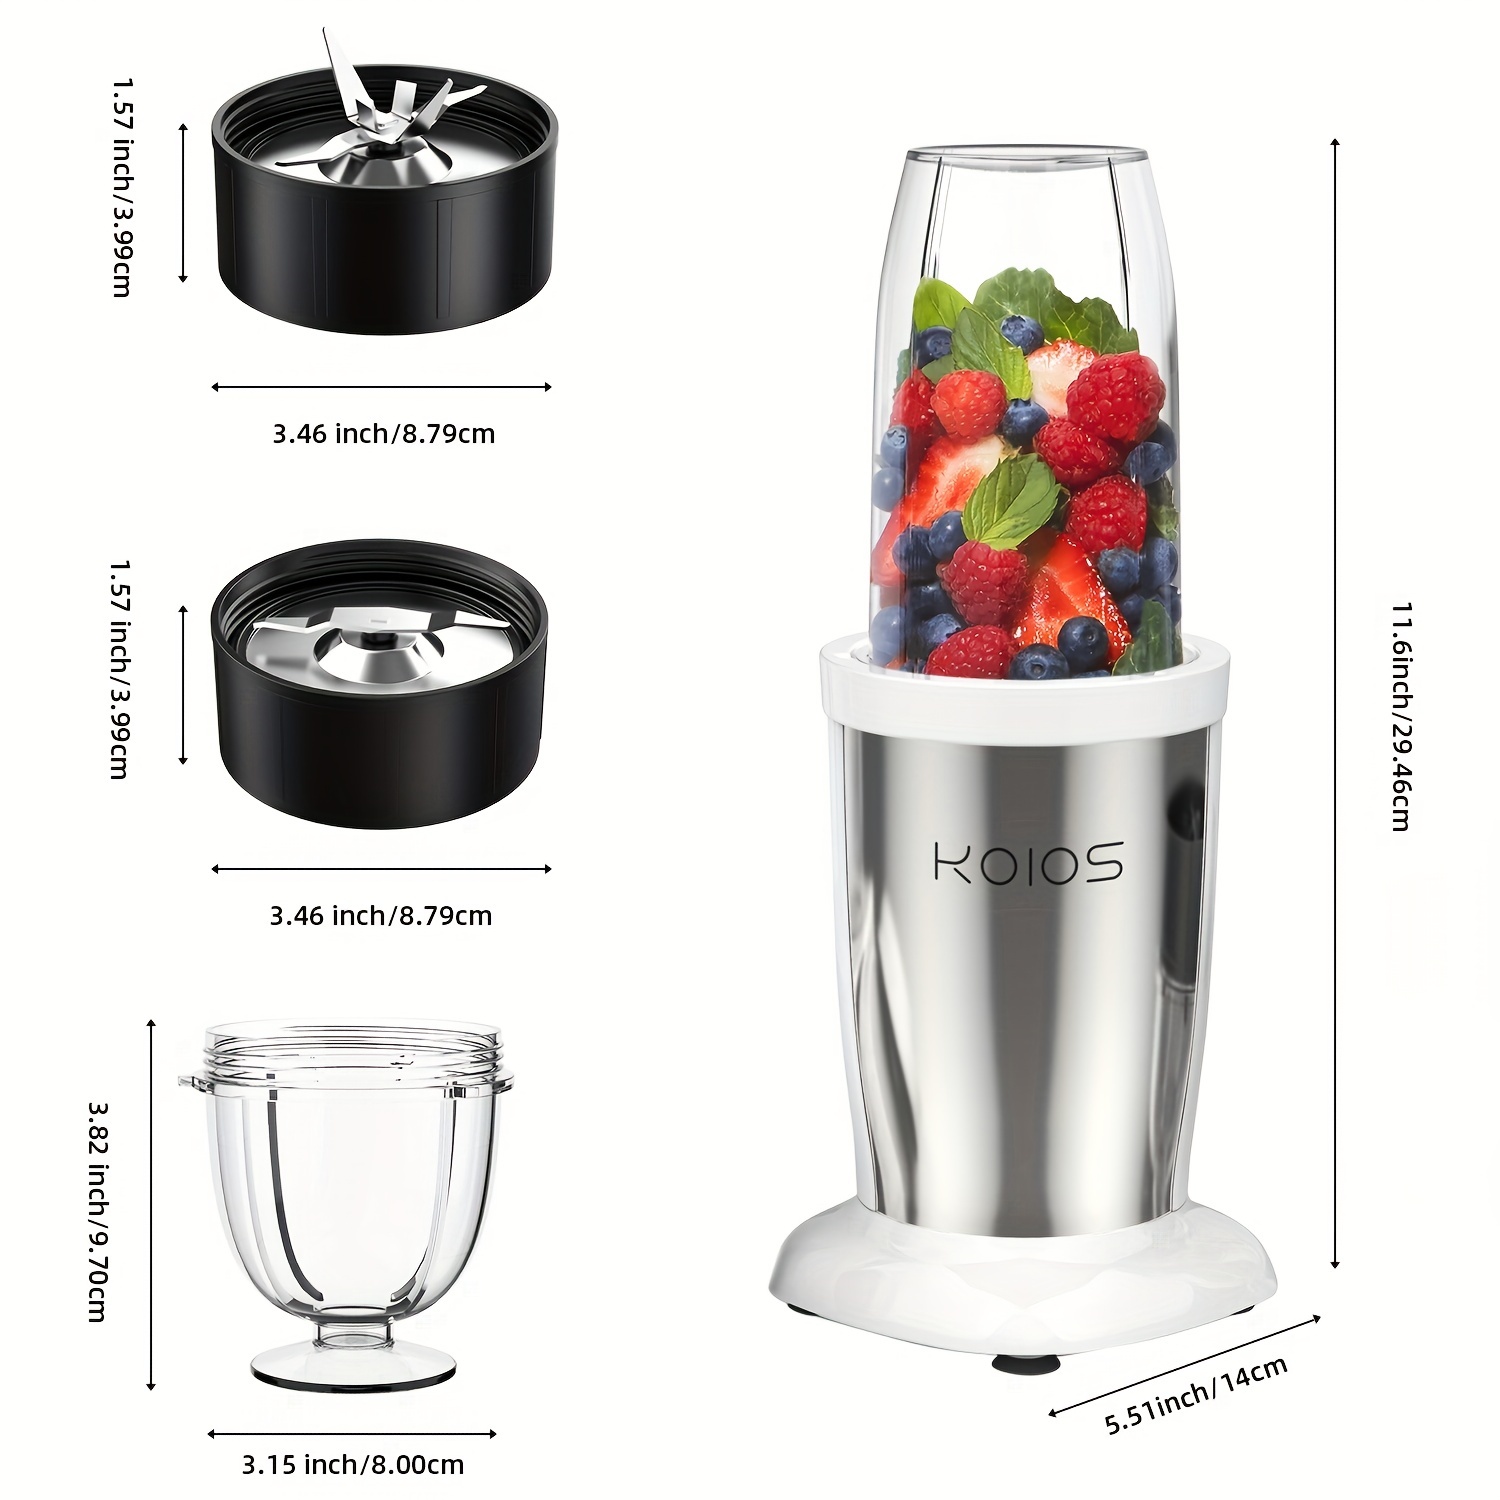 KOIOS 850W Personal Blender for Shakes and Smoothies